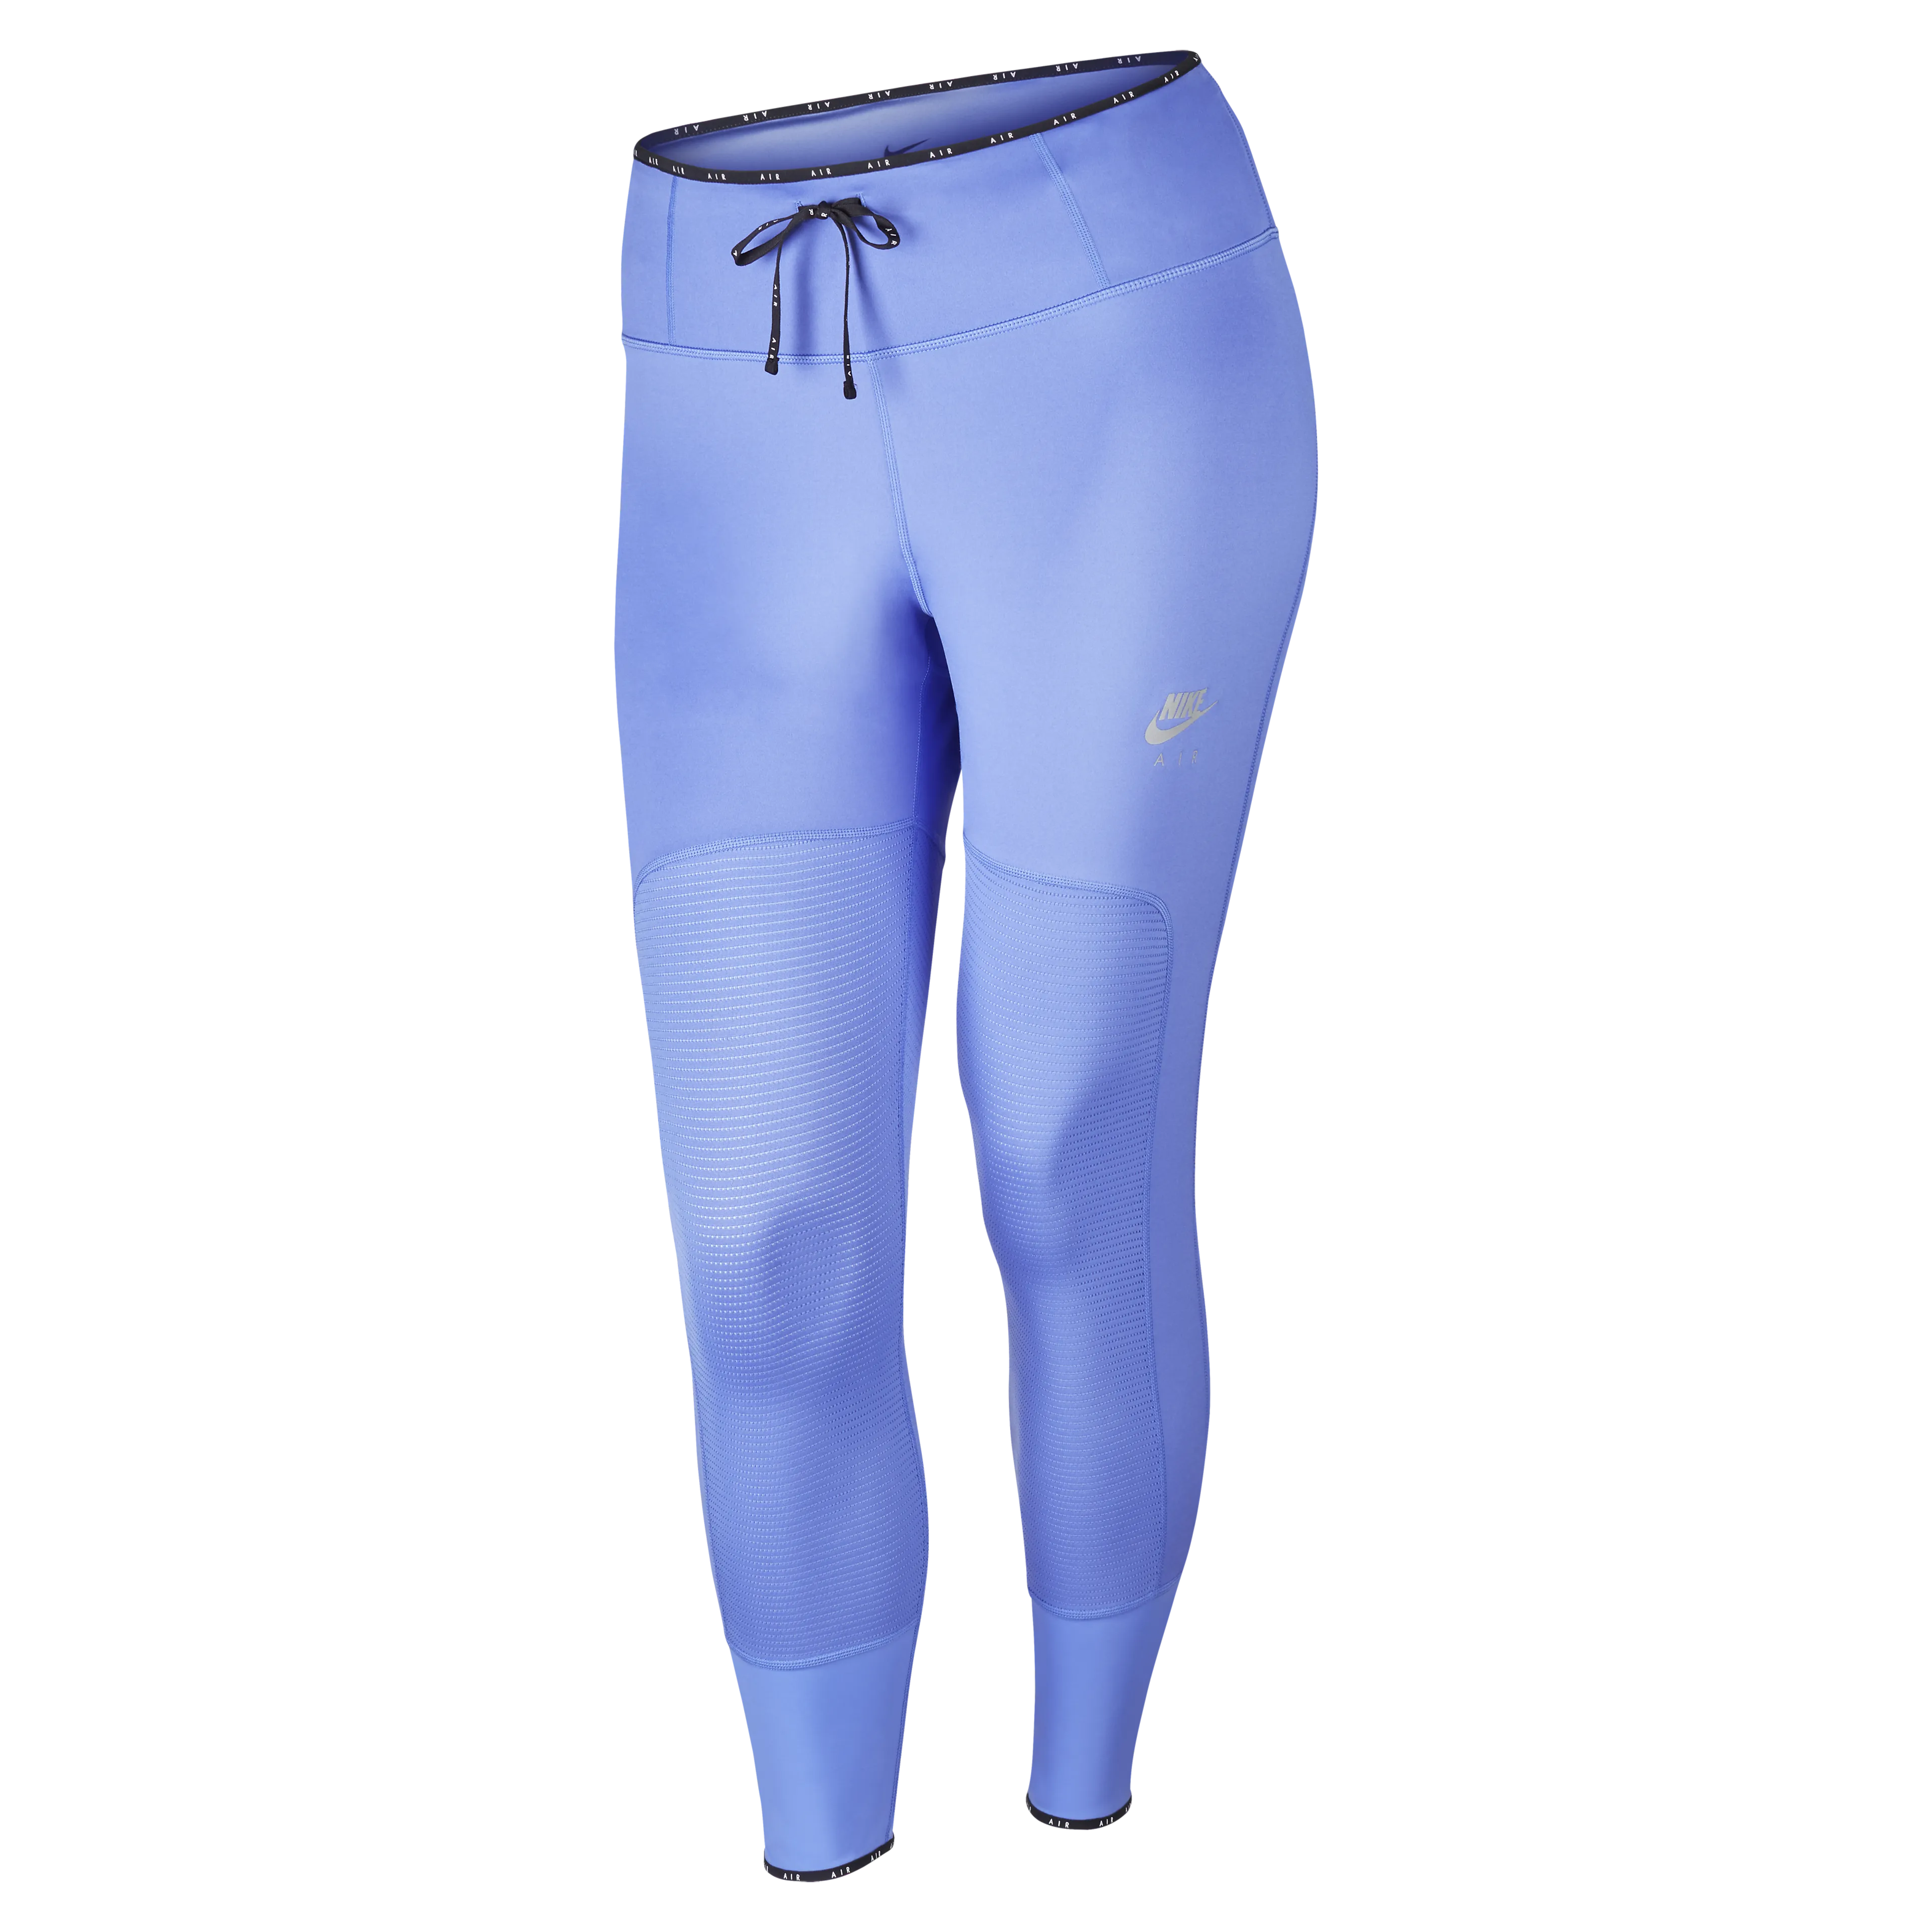 Plus Size Air 7/8 Running Tights